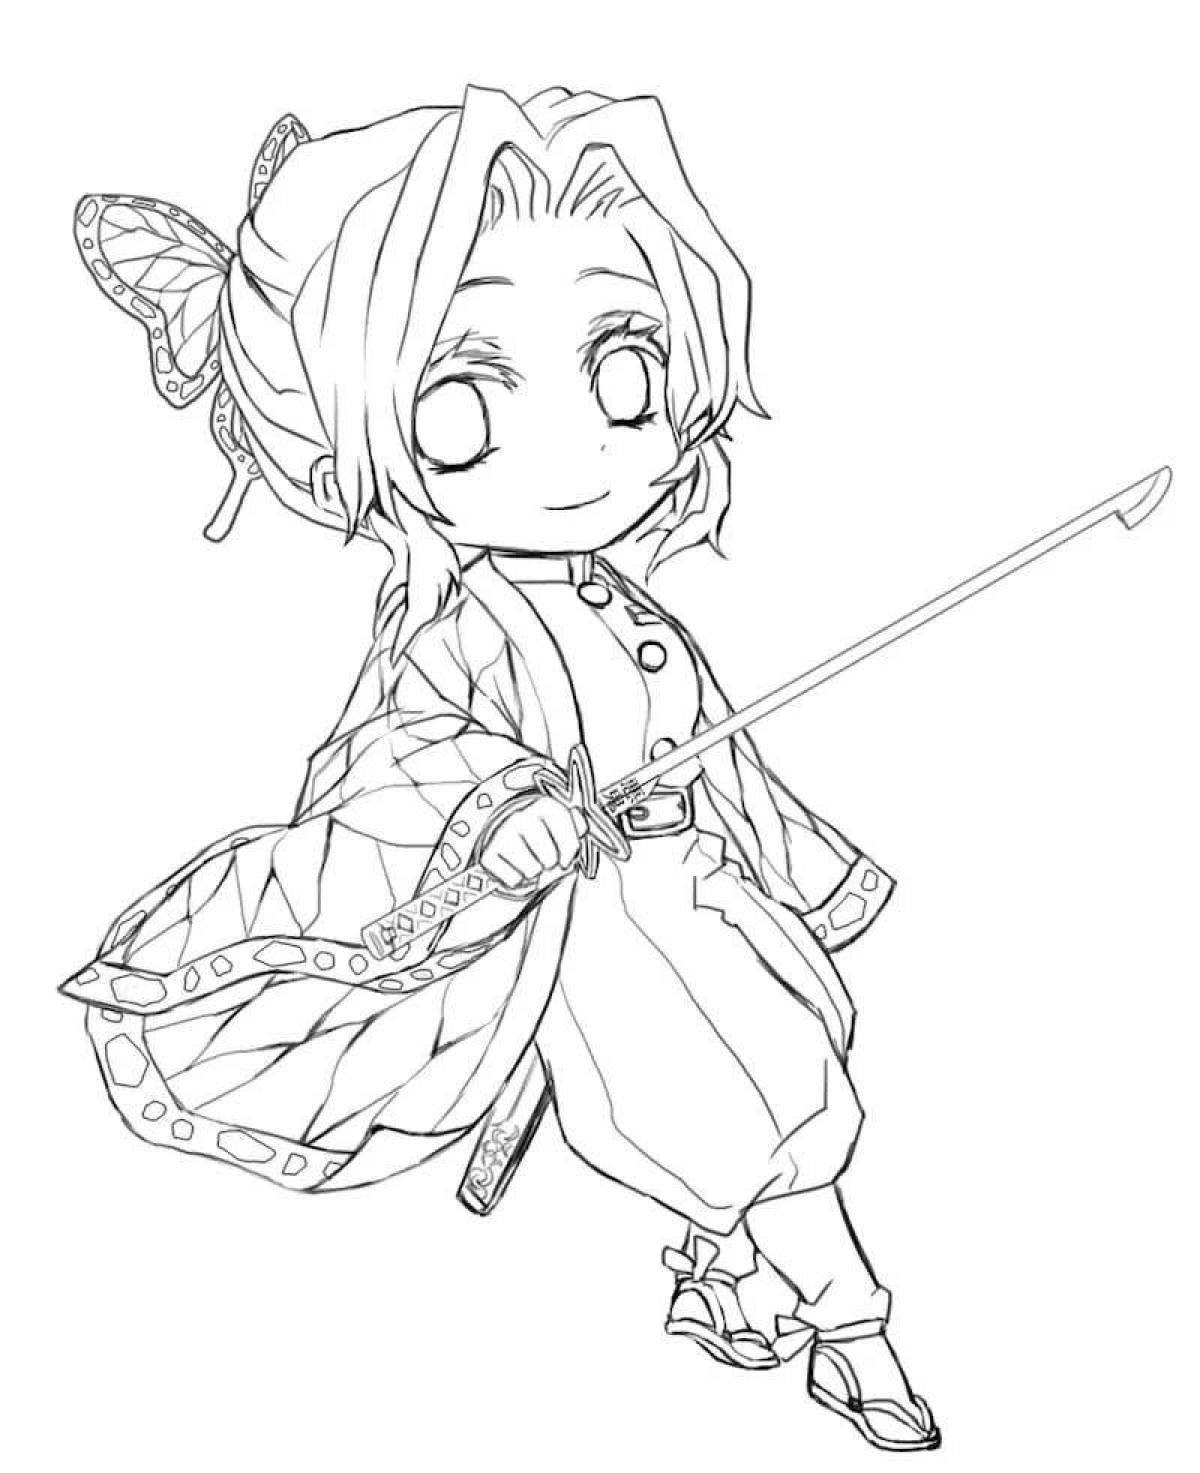 Animated chibi demon cleaver coloring page